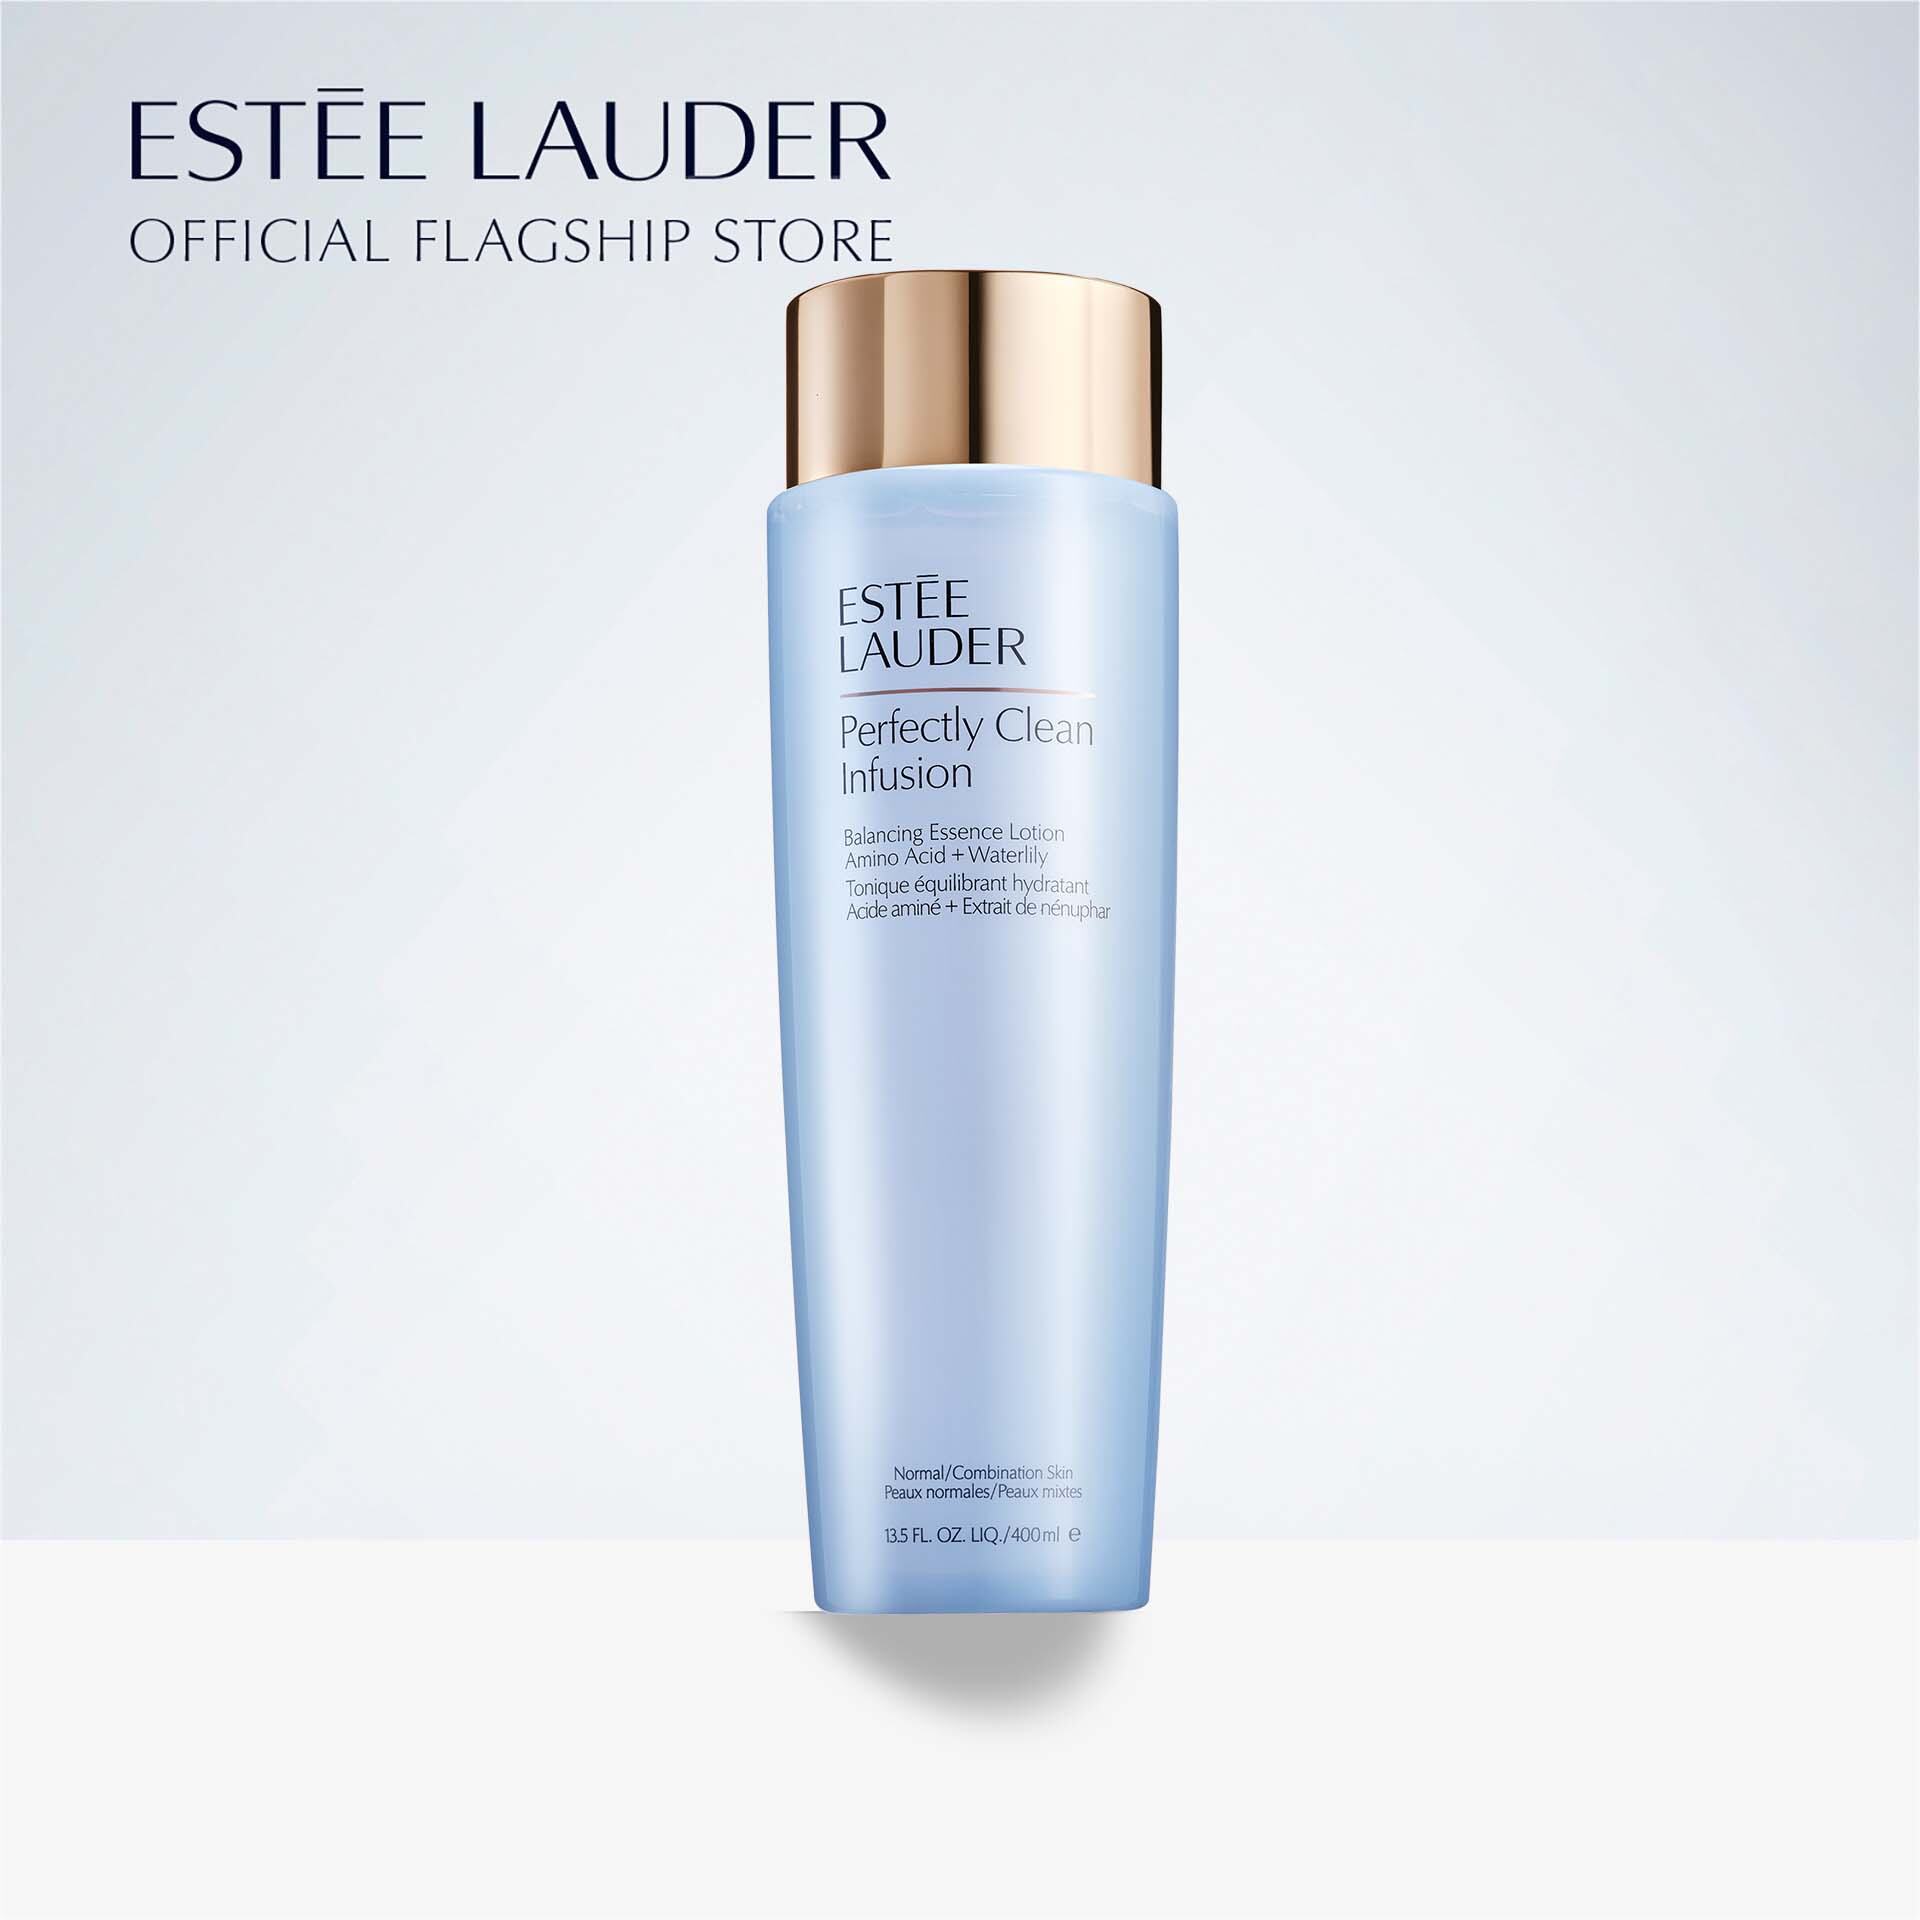 Nước cân bằng cấp ẩm Estee Lauder Perfectly Clean Infusion Balancing Essence Lotion with Amino Acid + Waterlily - Essence Lotion 400ml